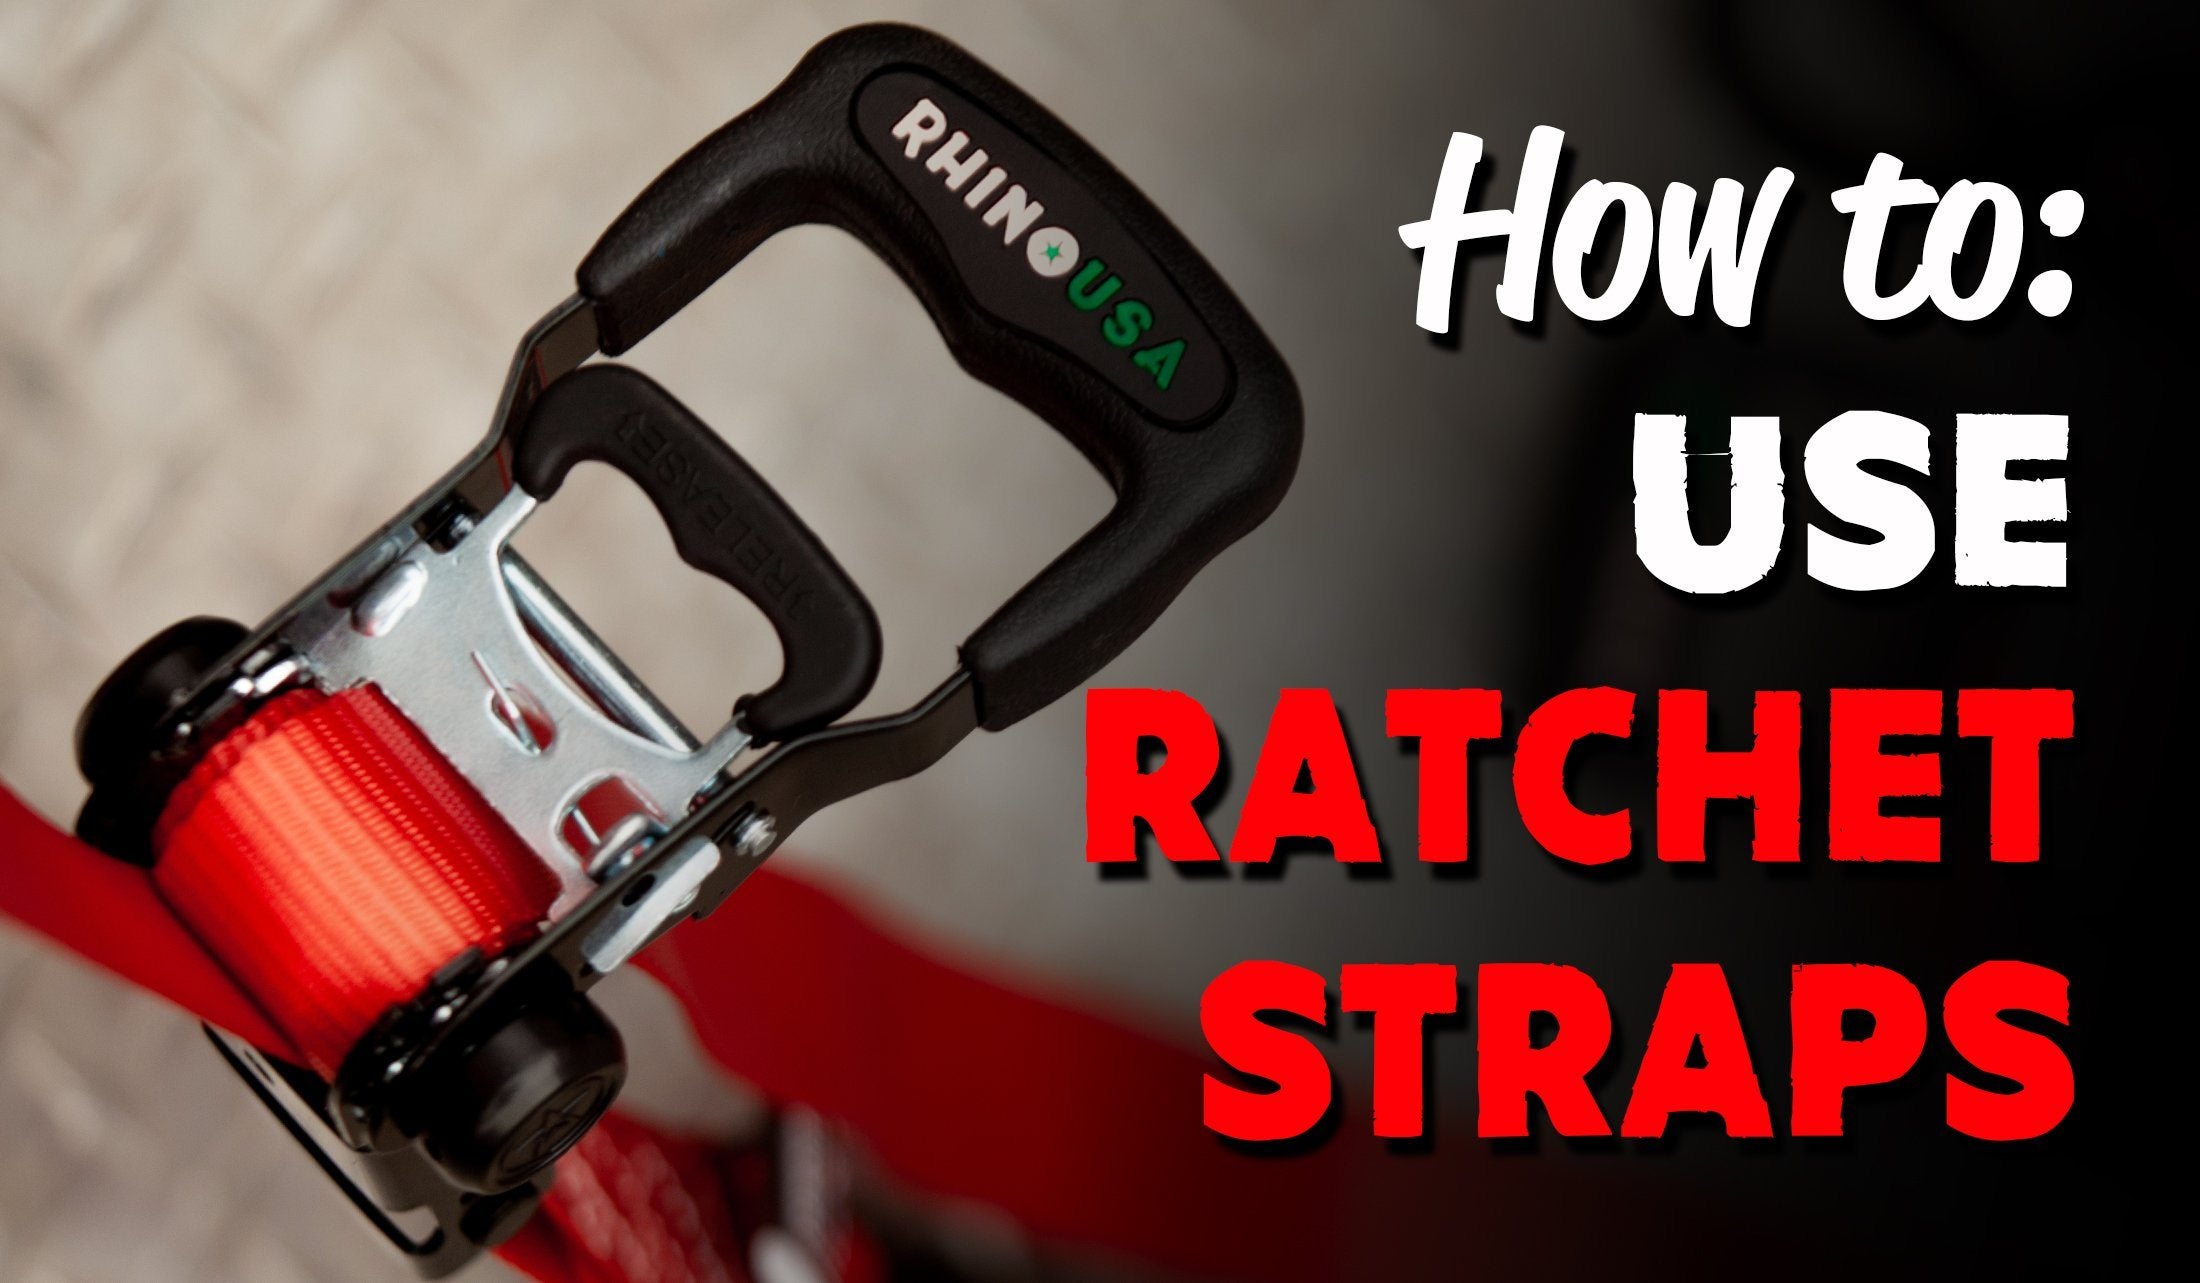 A Guide to Using Ratchet Straps